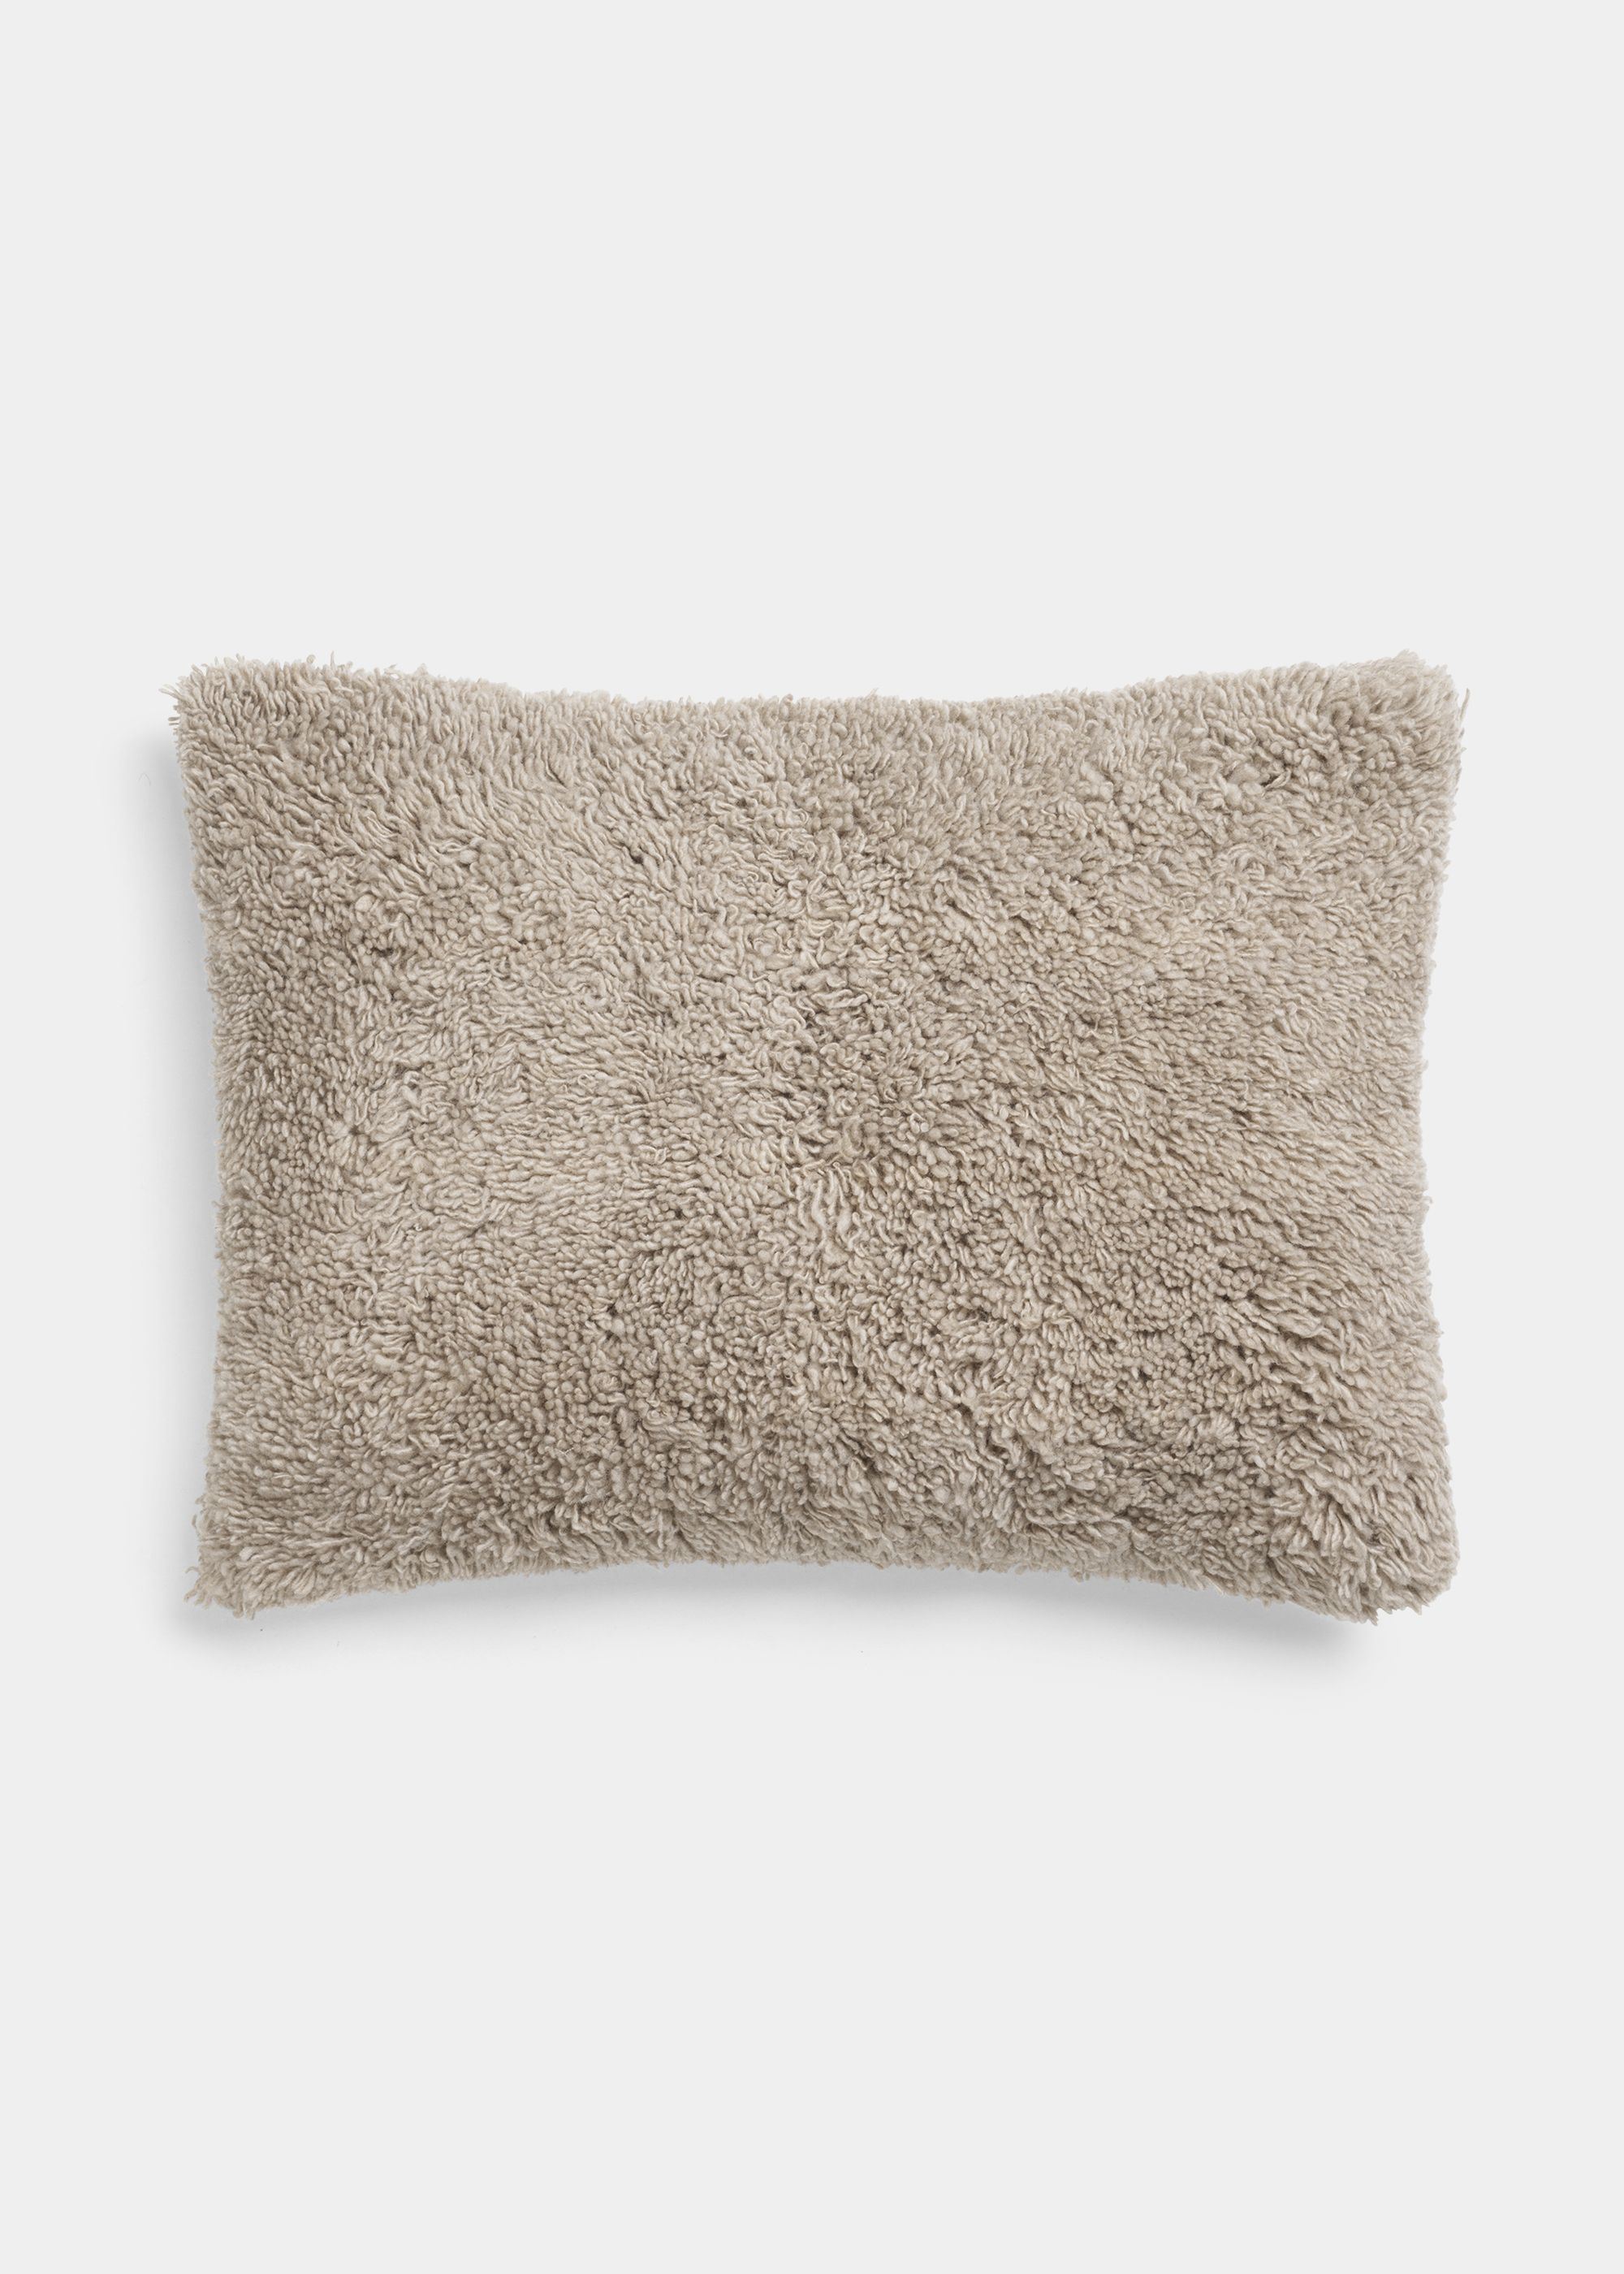 Cushions - Puffy Cashmere Pillow (30x40)